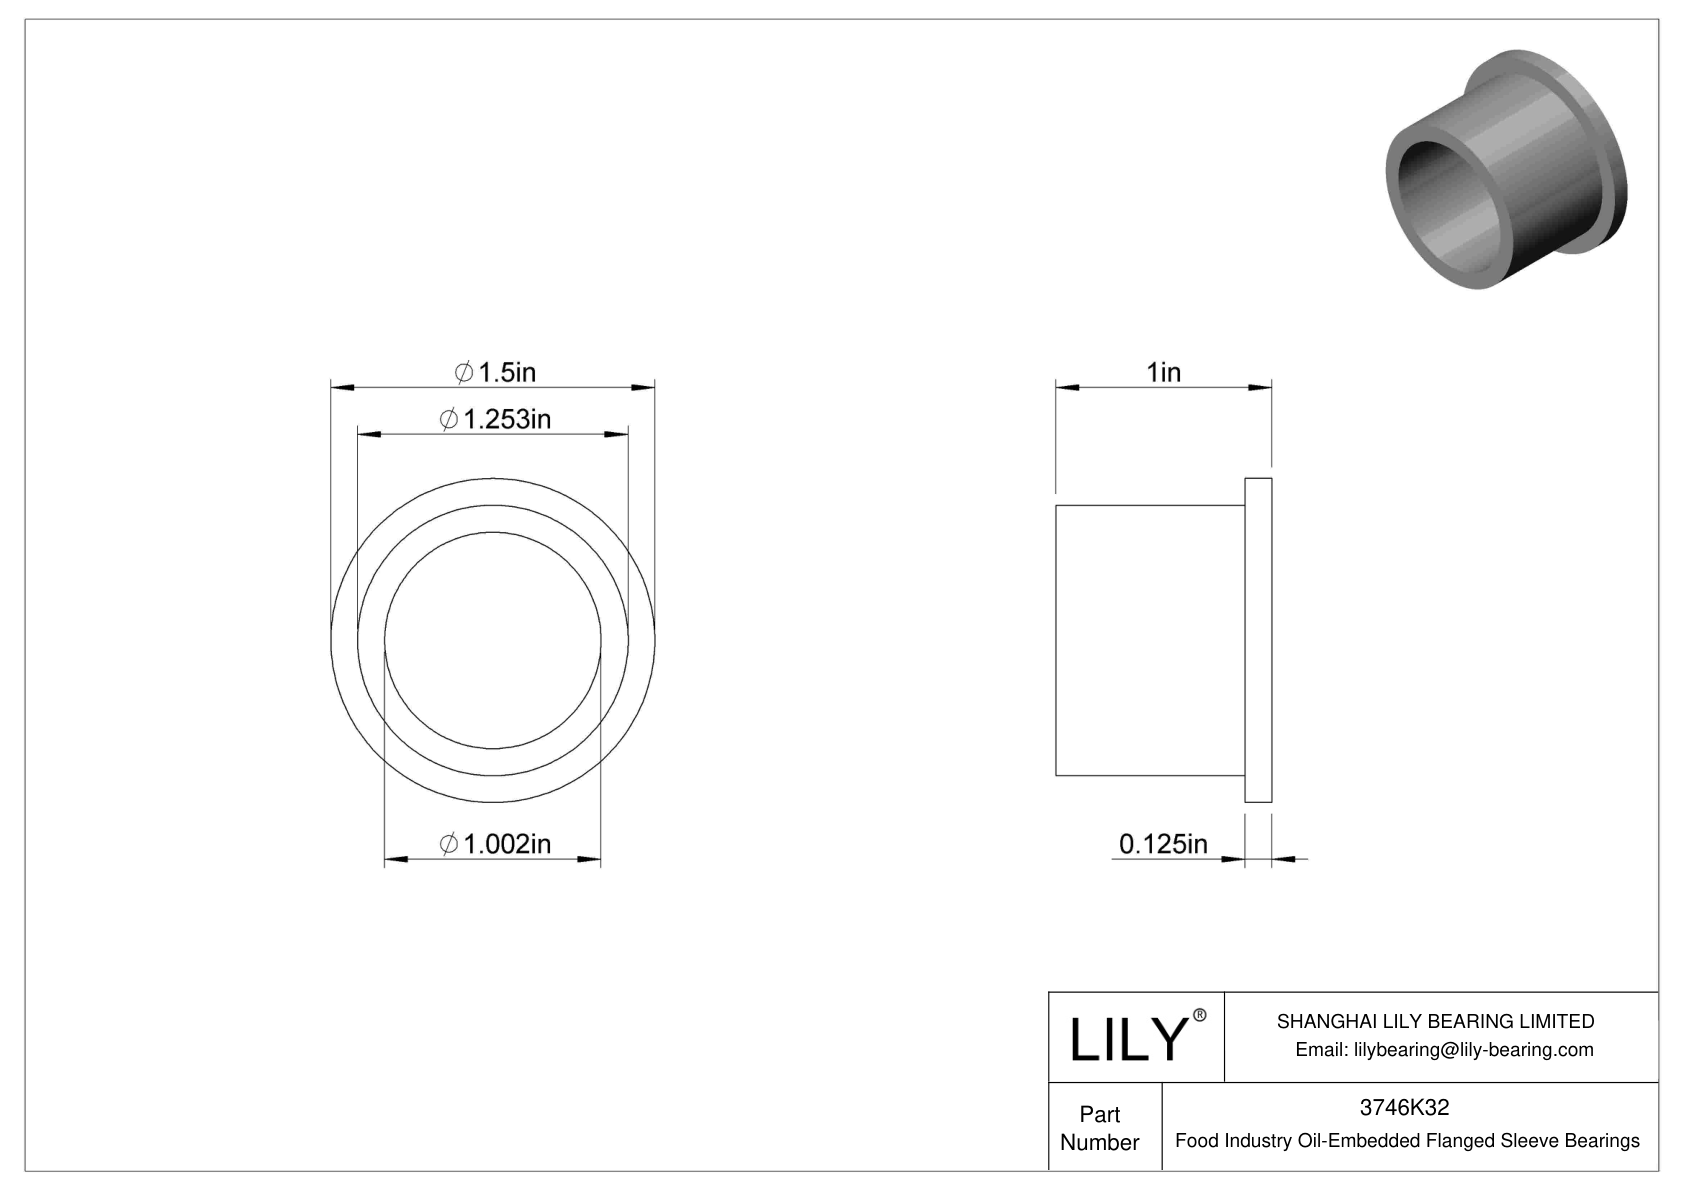 DHEGKDC Food Industry Oil-Embedded Flanged Sleeve Bearings cad drawing